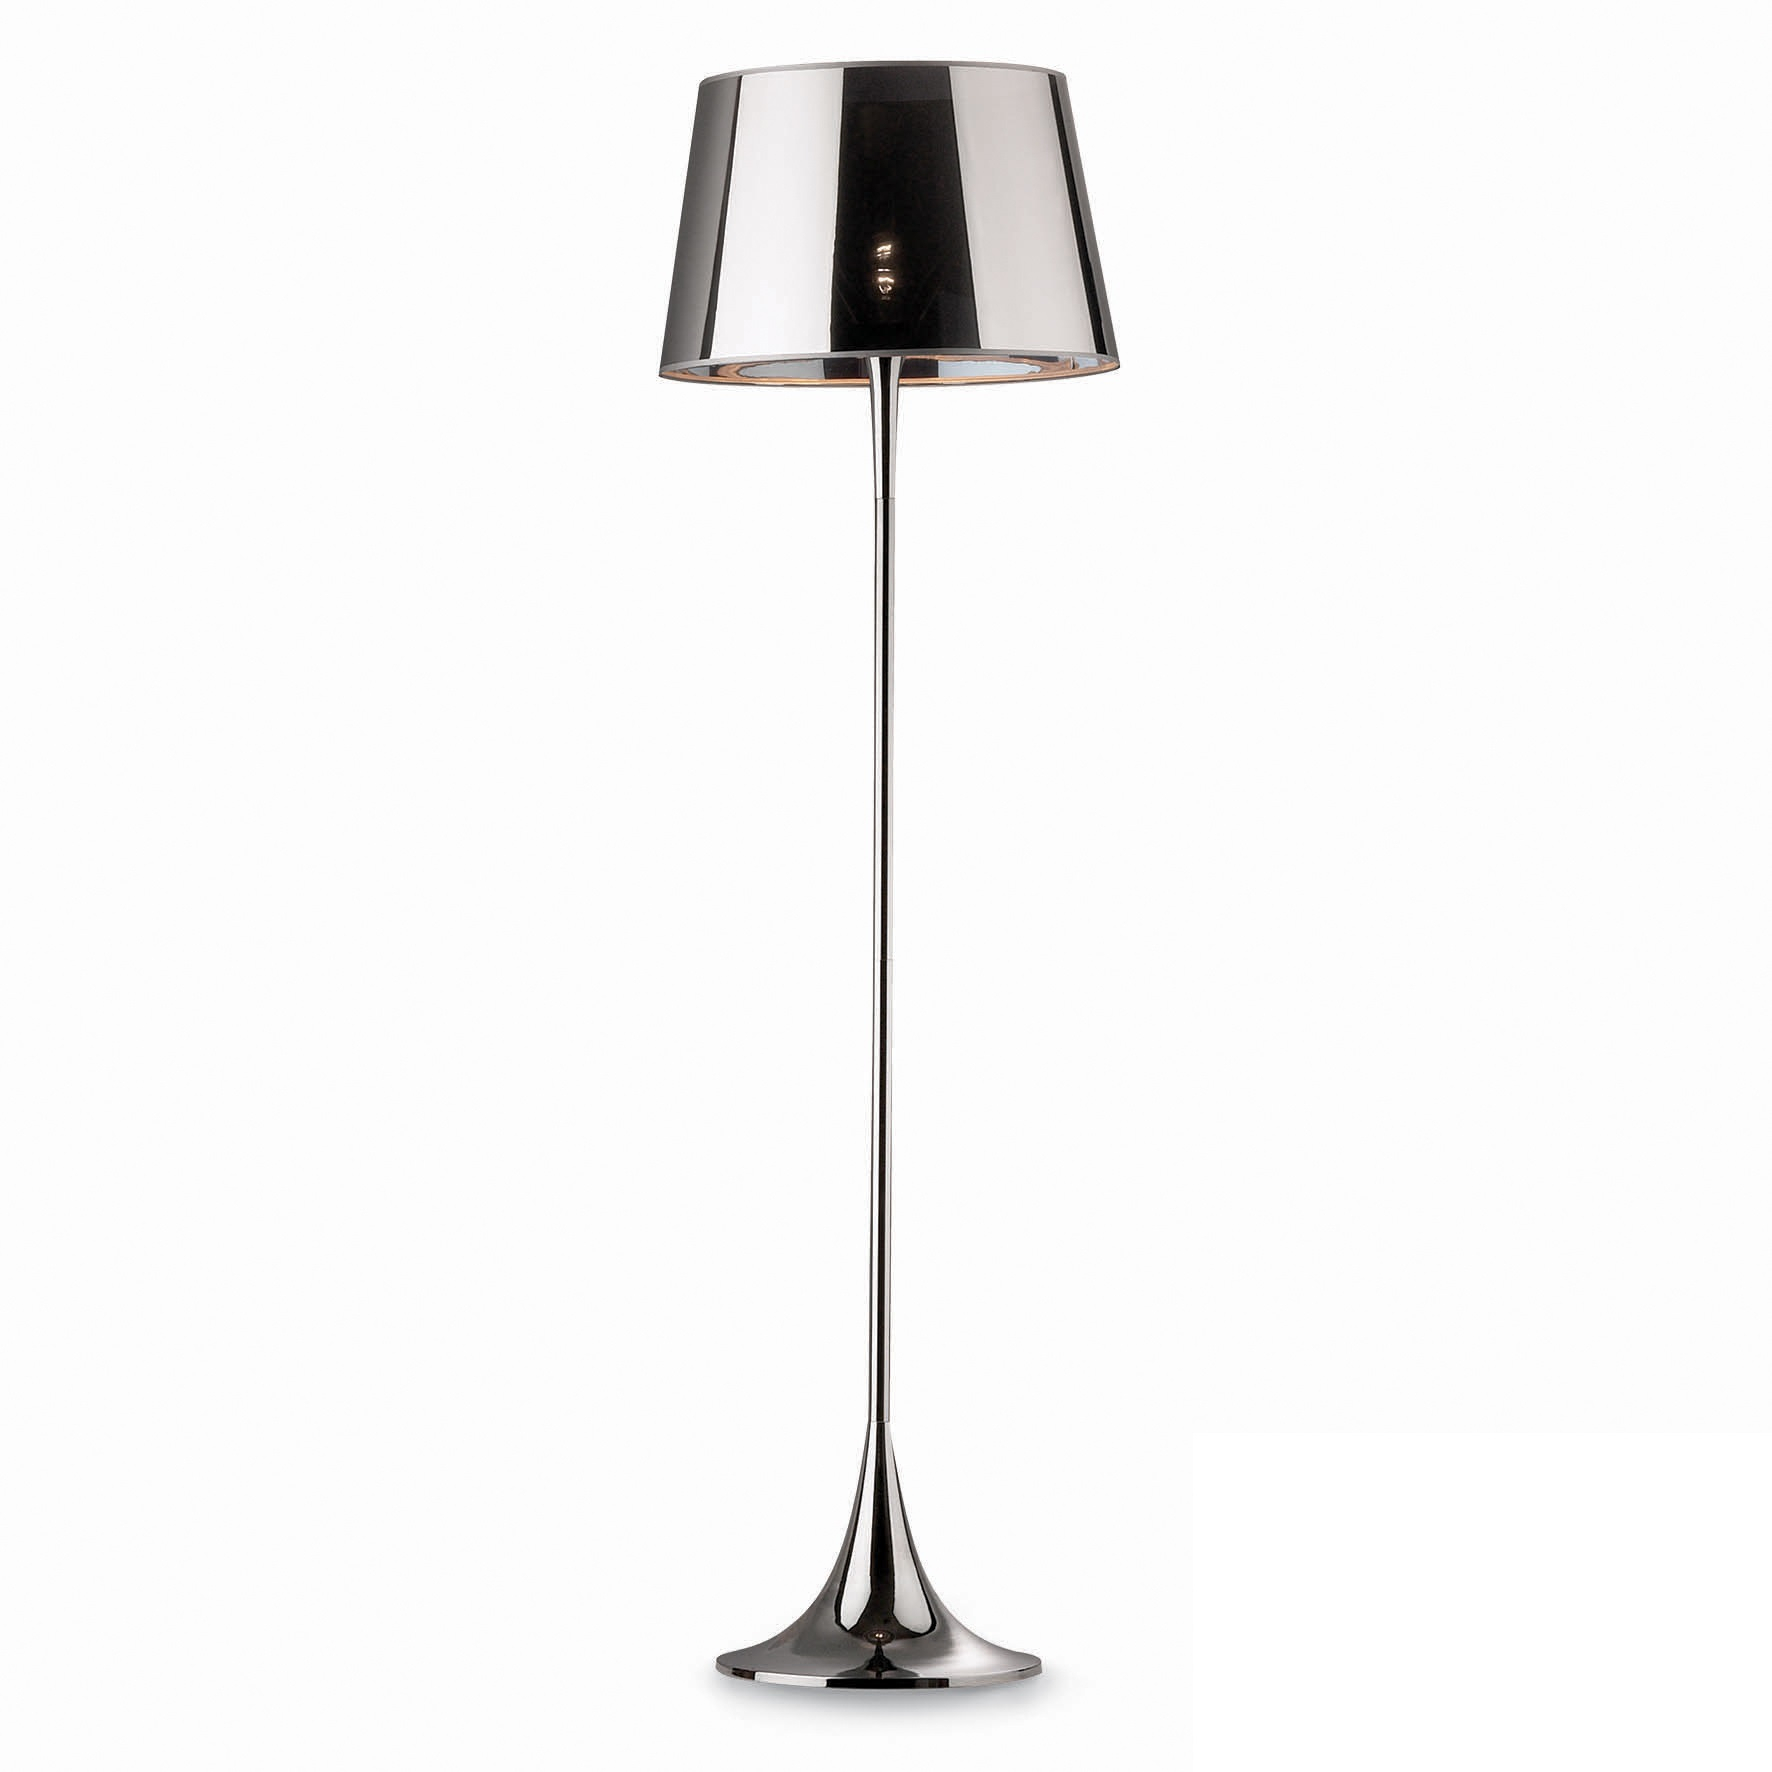 Ideallux London Pt1 Modern Floor Lamp Metal Chrome Mirrored Shade in dimensions 1772 X 1772